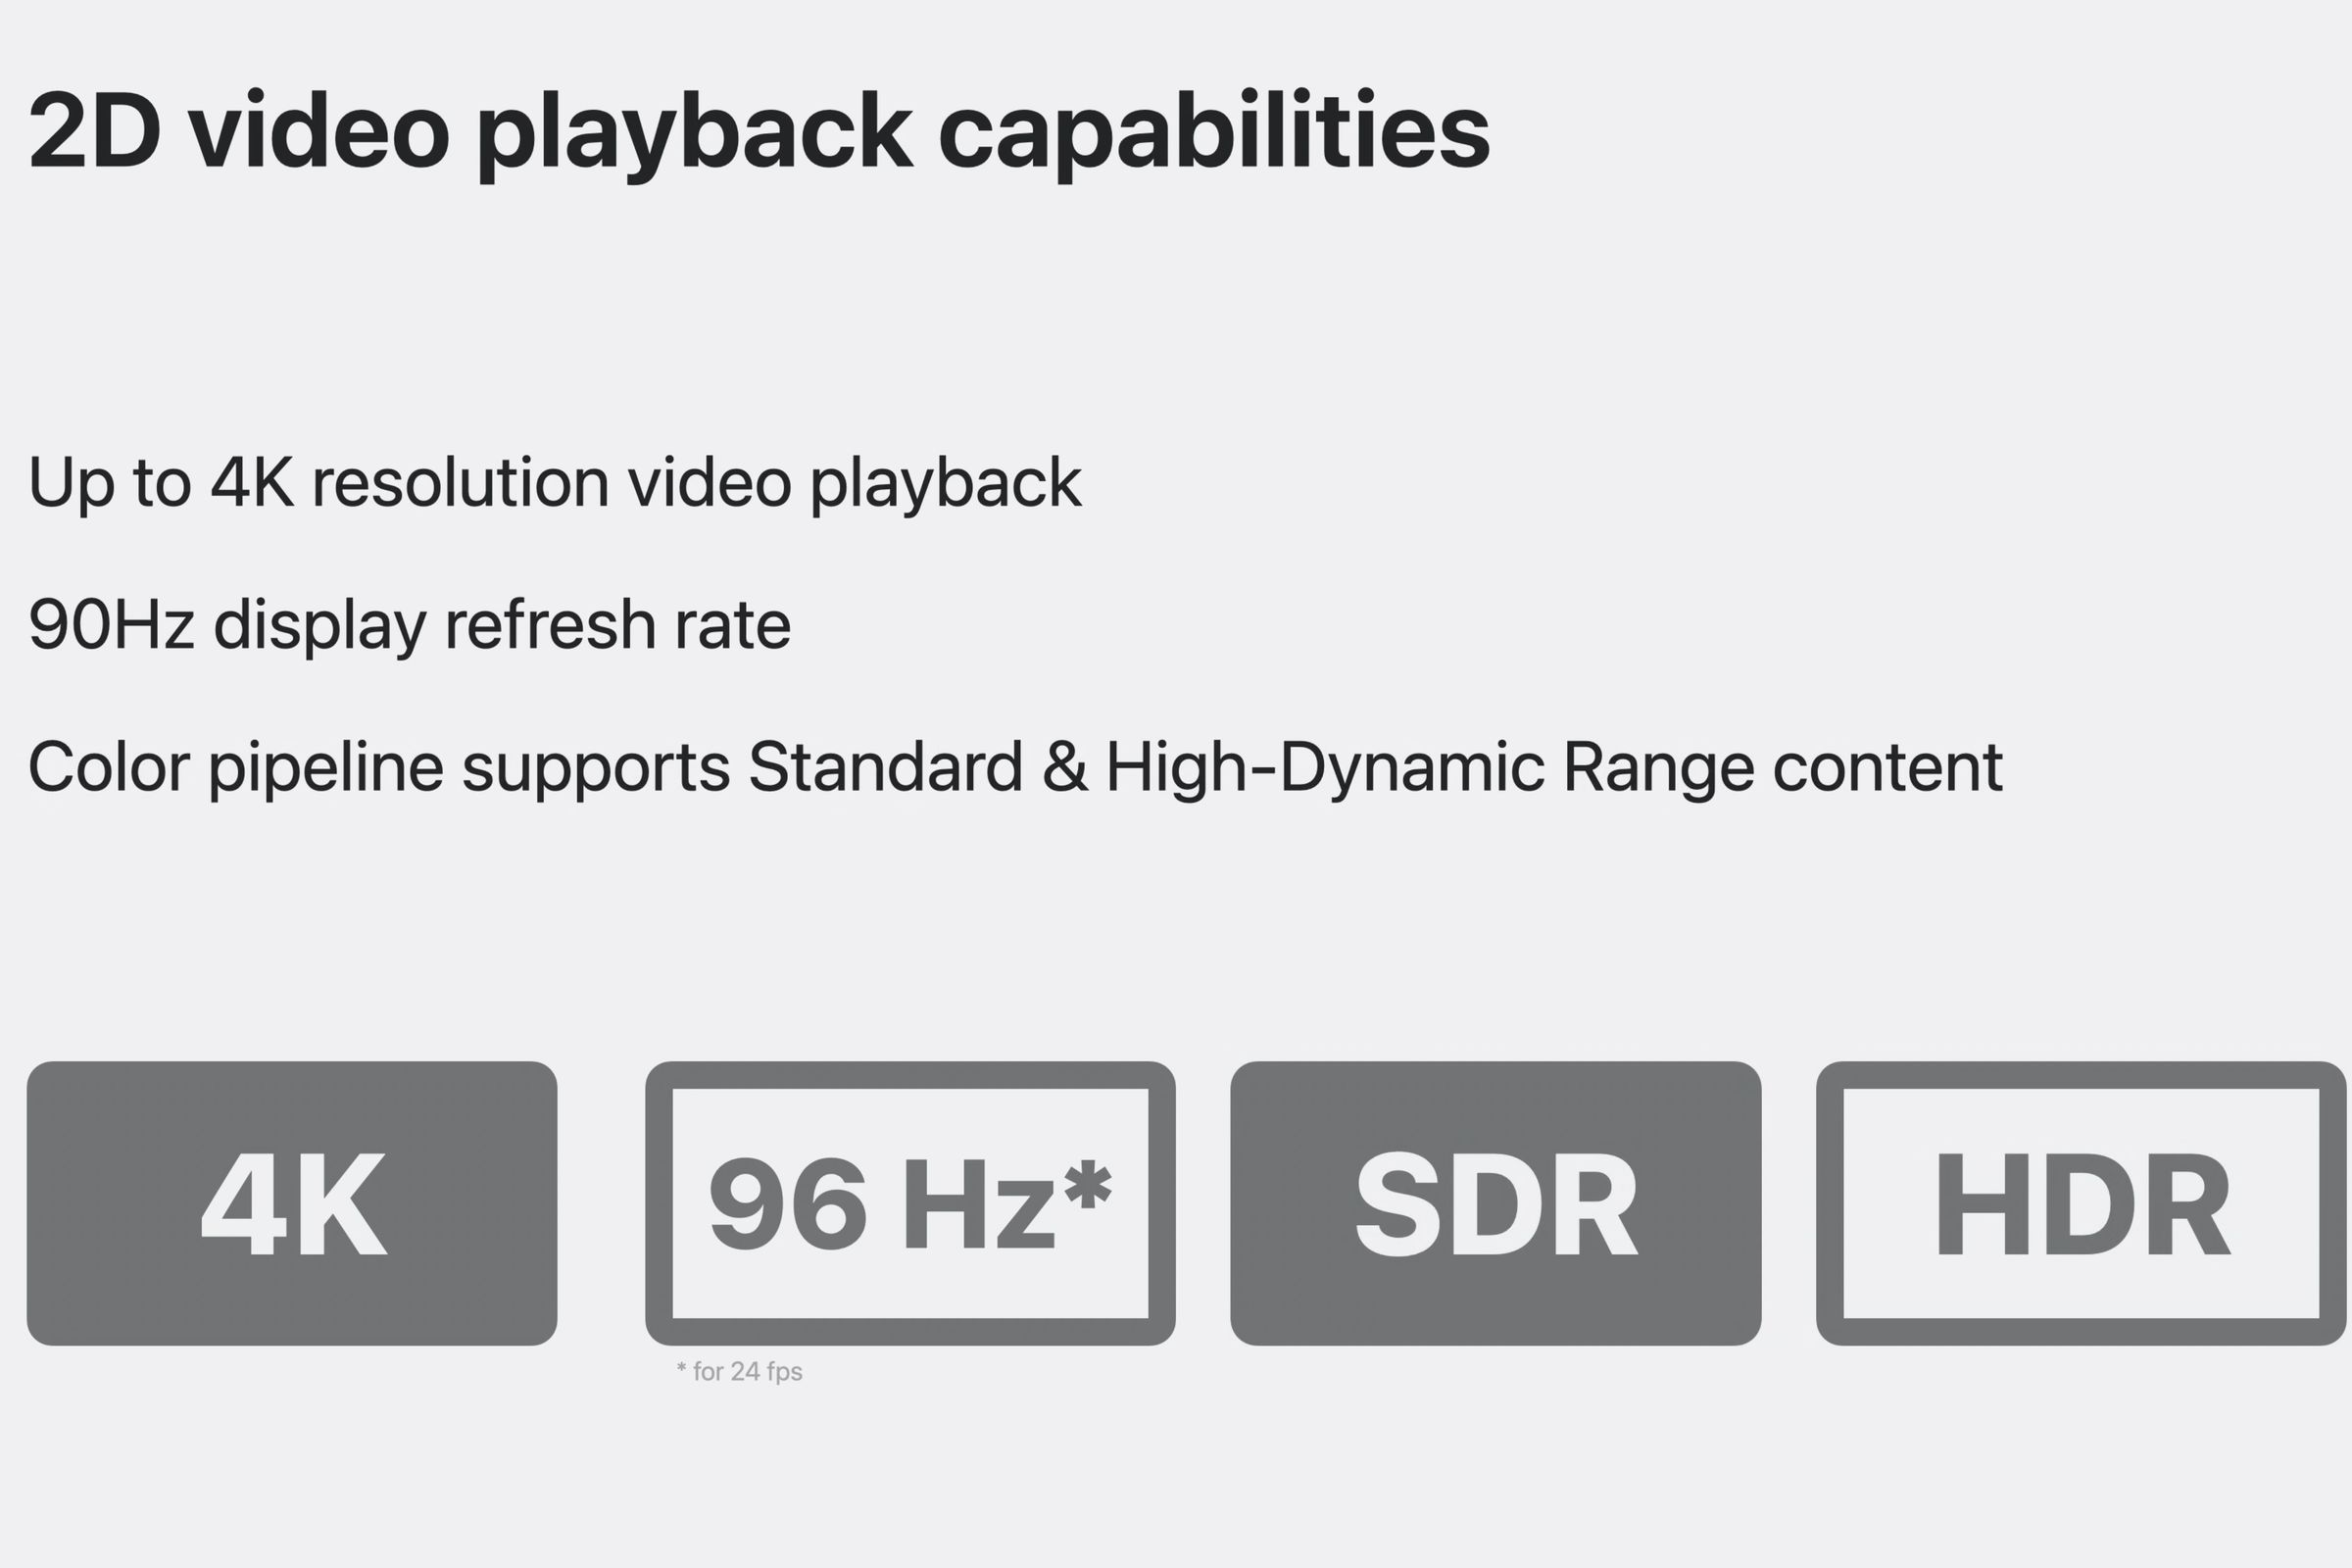 The Vision Pro supports 4K video playback, and its displays support up to 96Hz with HDR support.